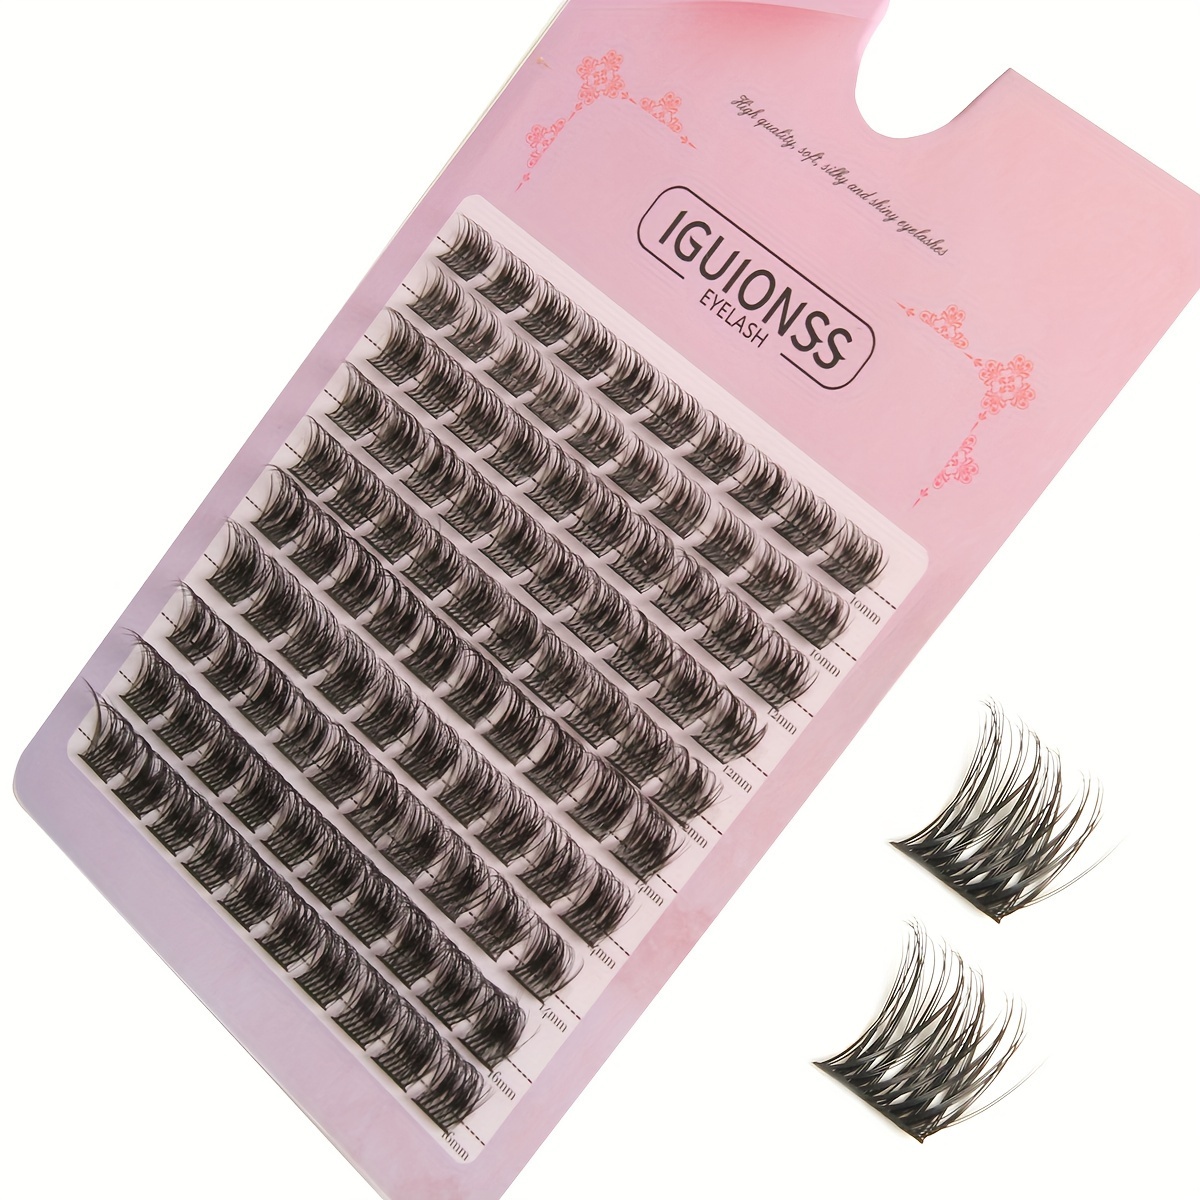 

Lash Clusters Diy Eyelash Extensions 100 Clusters Lashes Mix 8-16mm 10 Styles C D Curling Individual Lashes